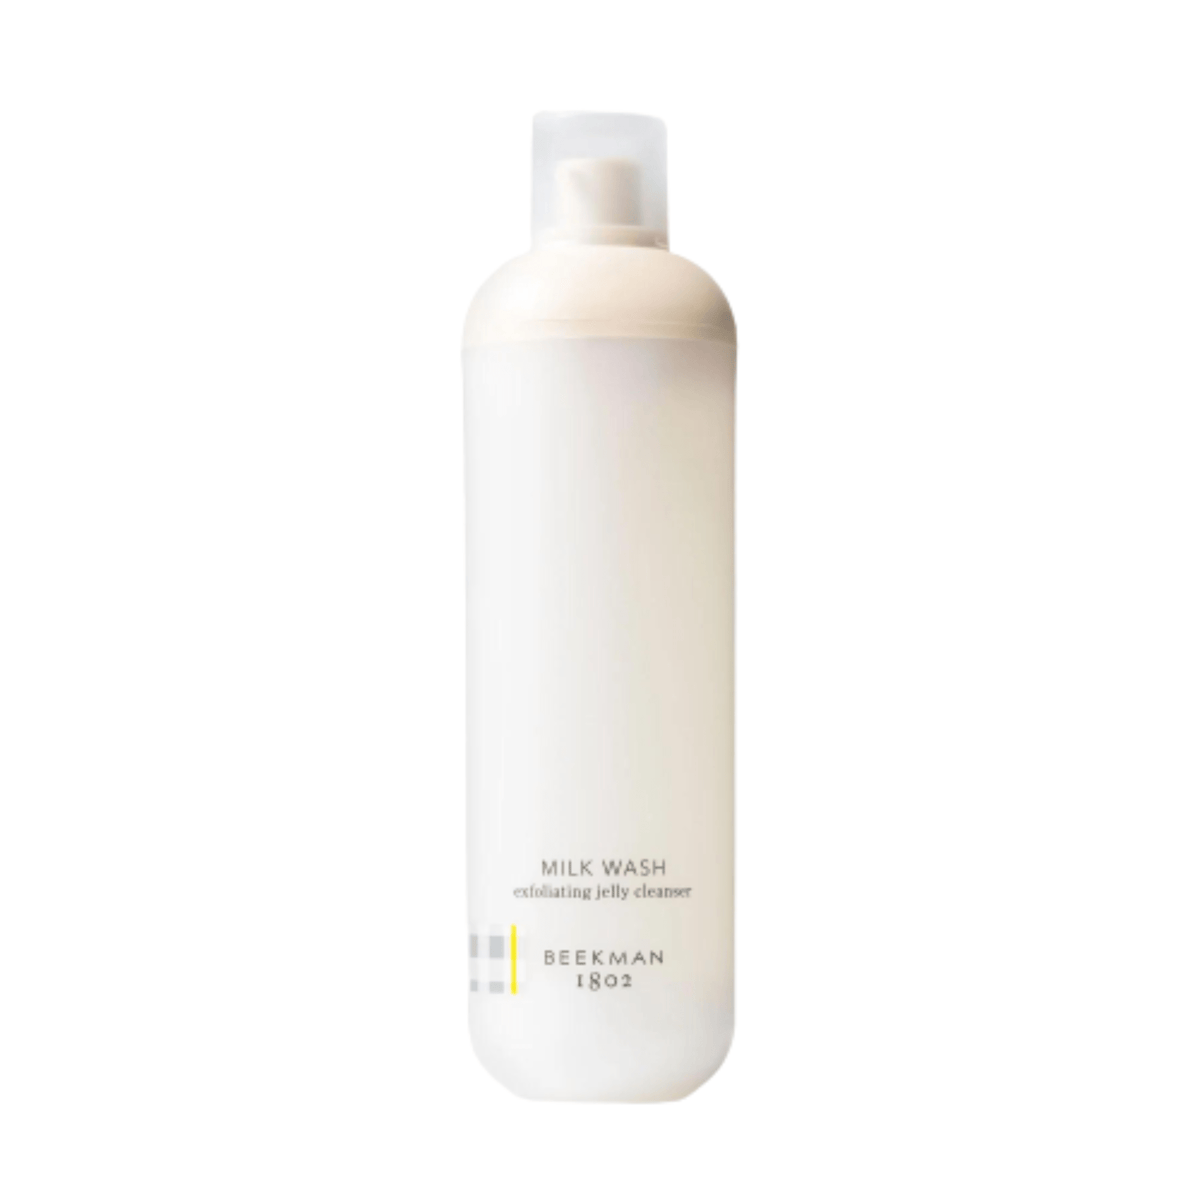 Primary Image of Milk Wash Exfoliating Jelly Cleanser